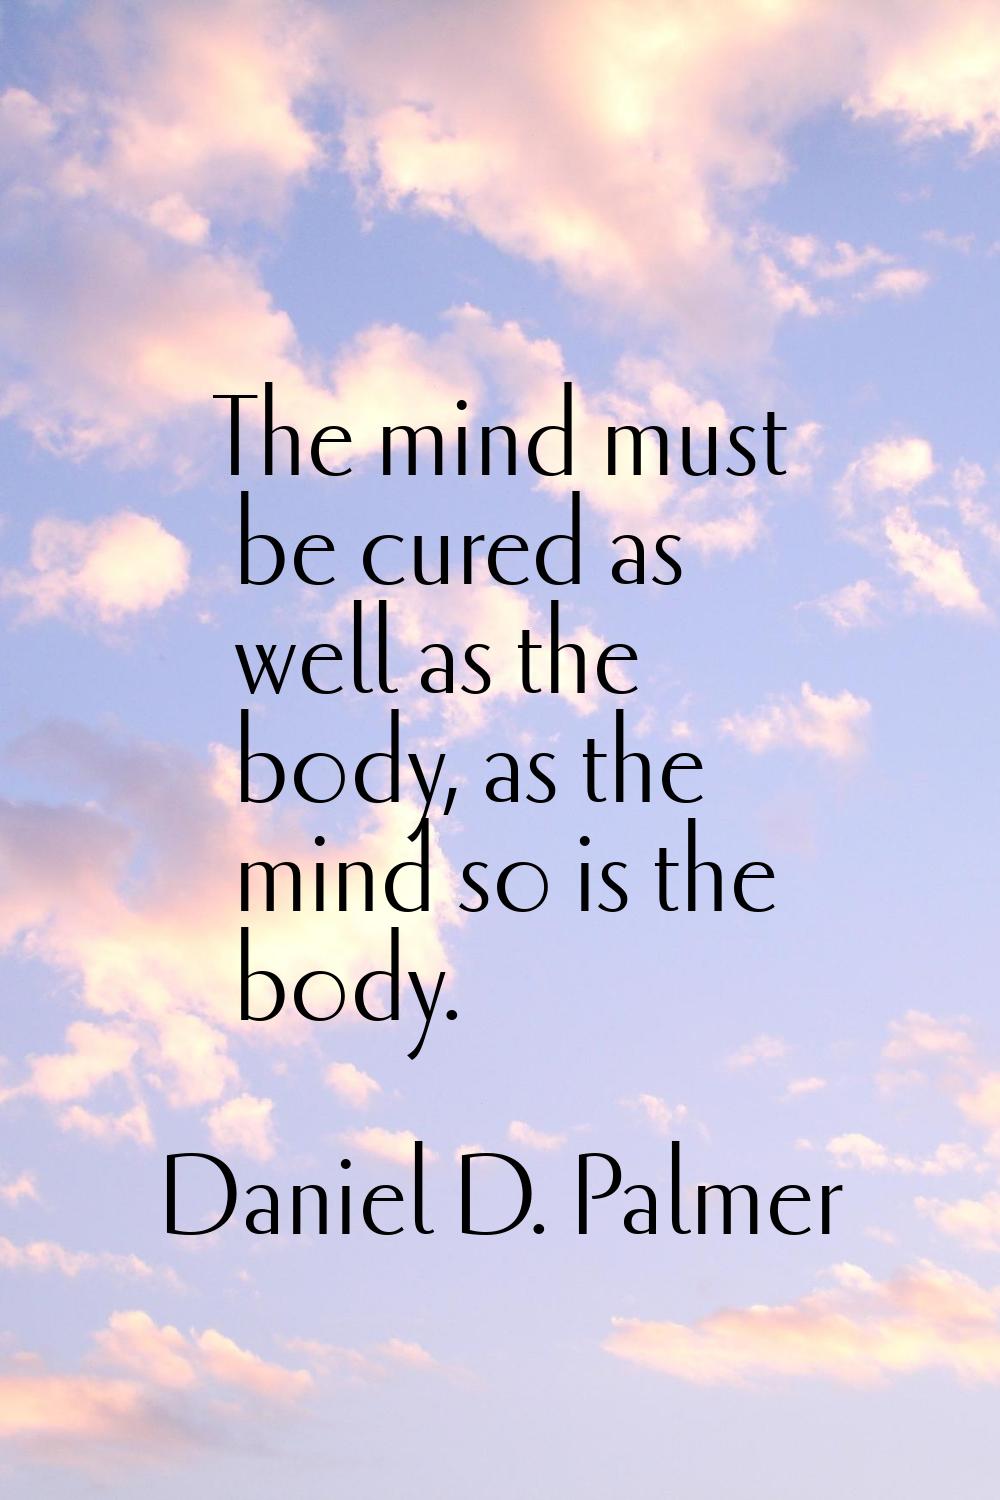 The mind must be cured as well as the body, as the mind so is the body.